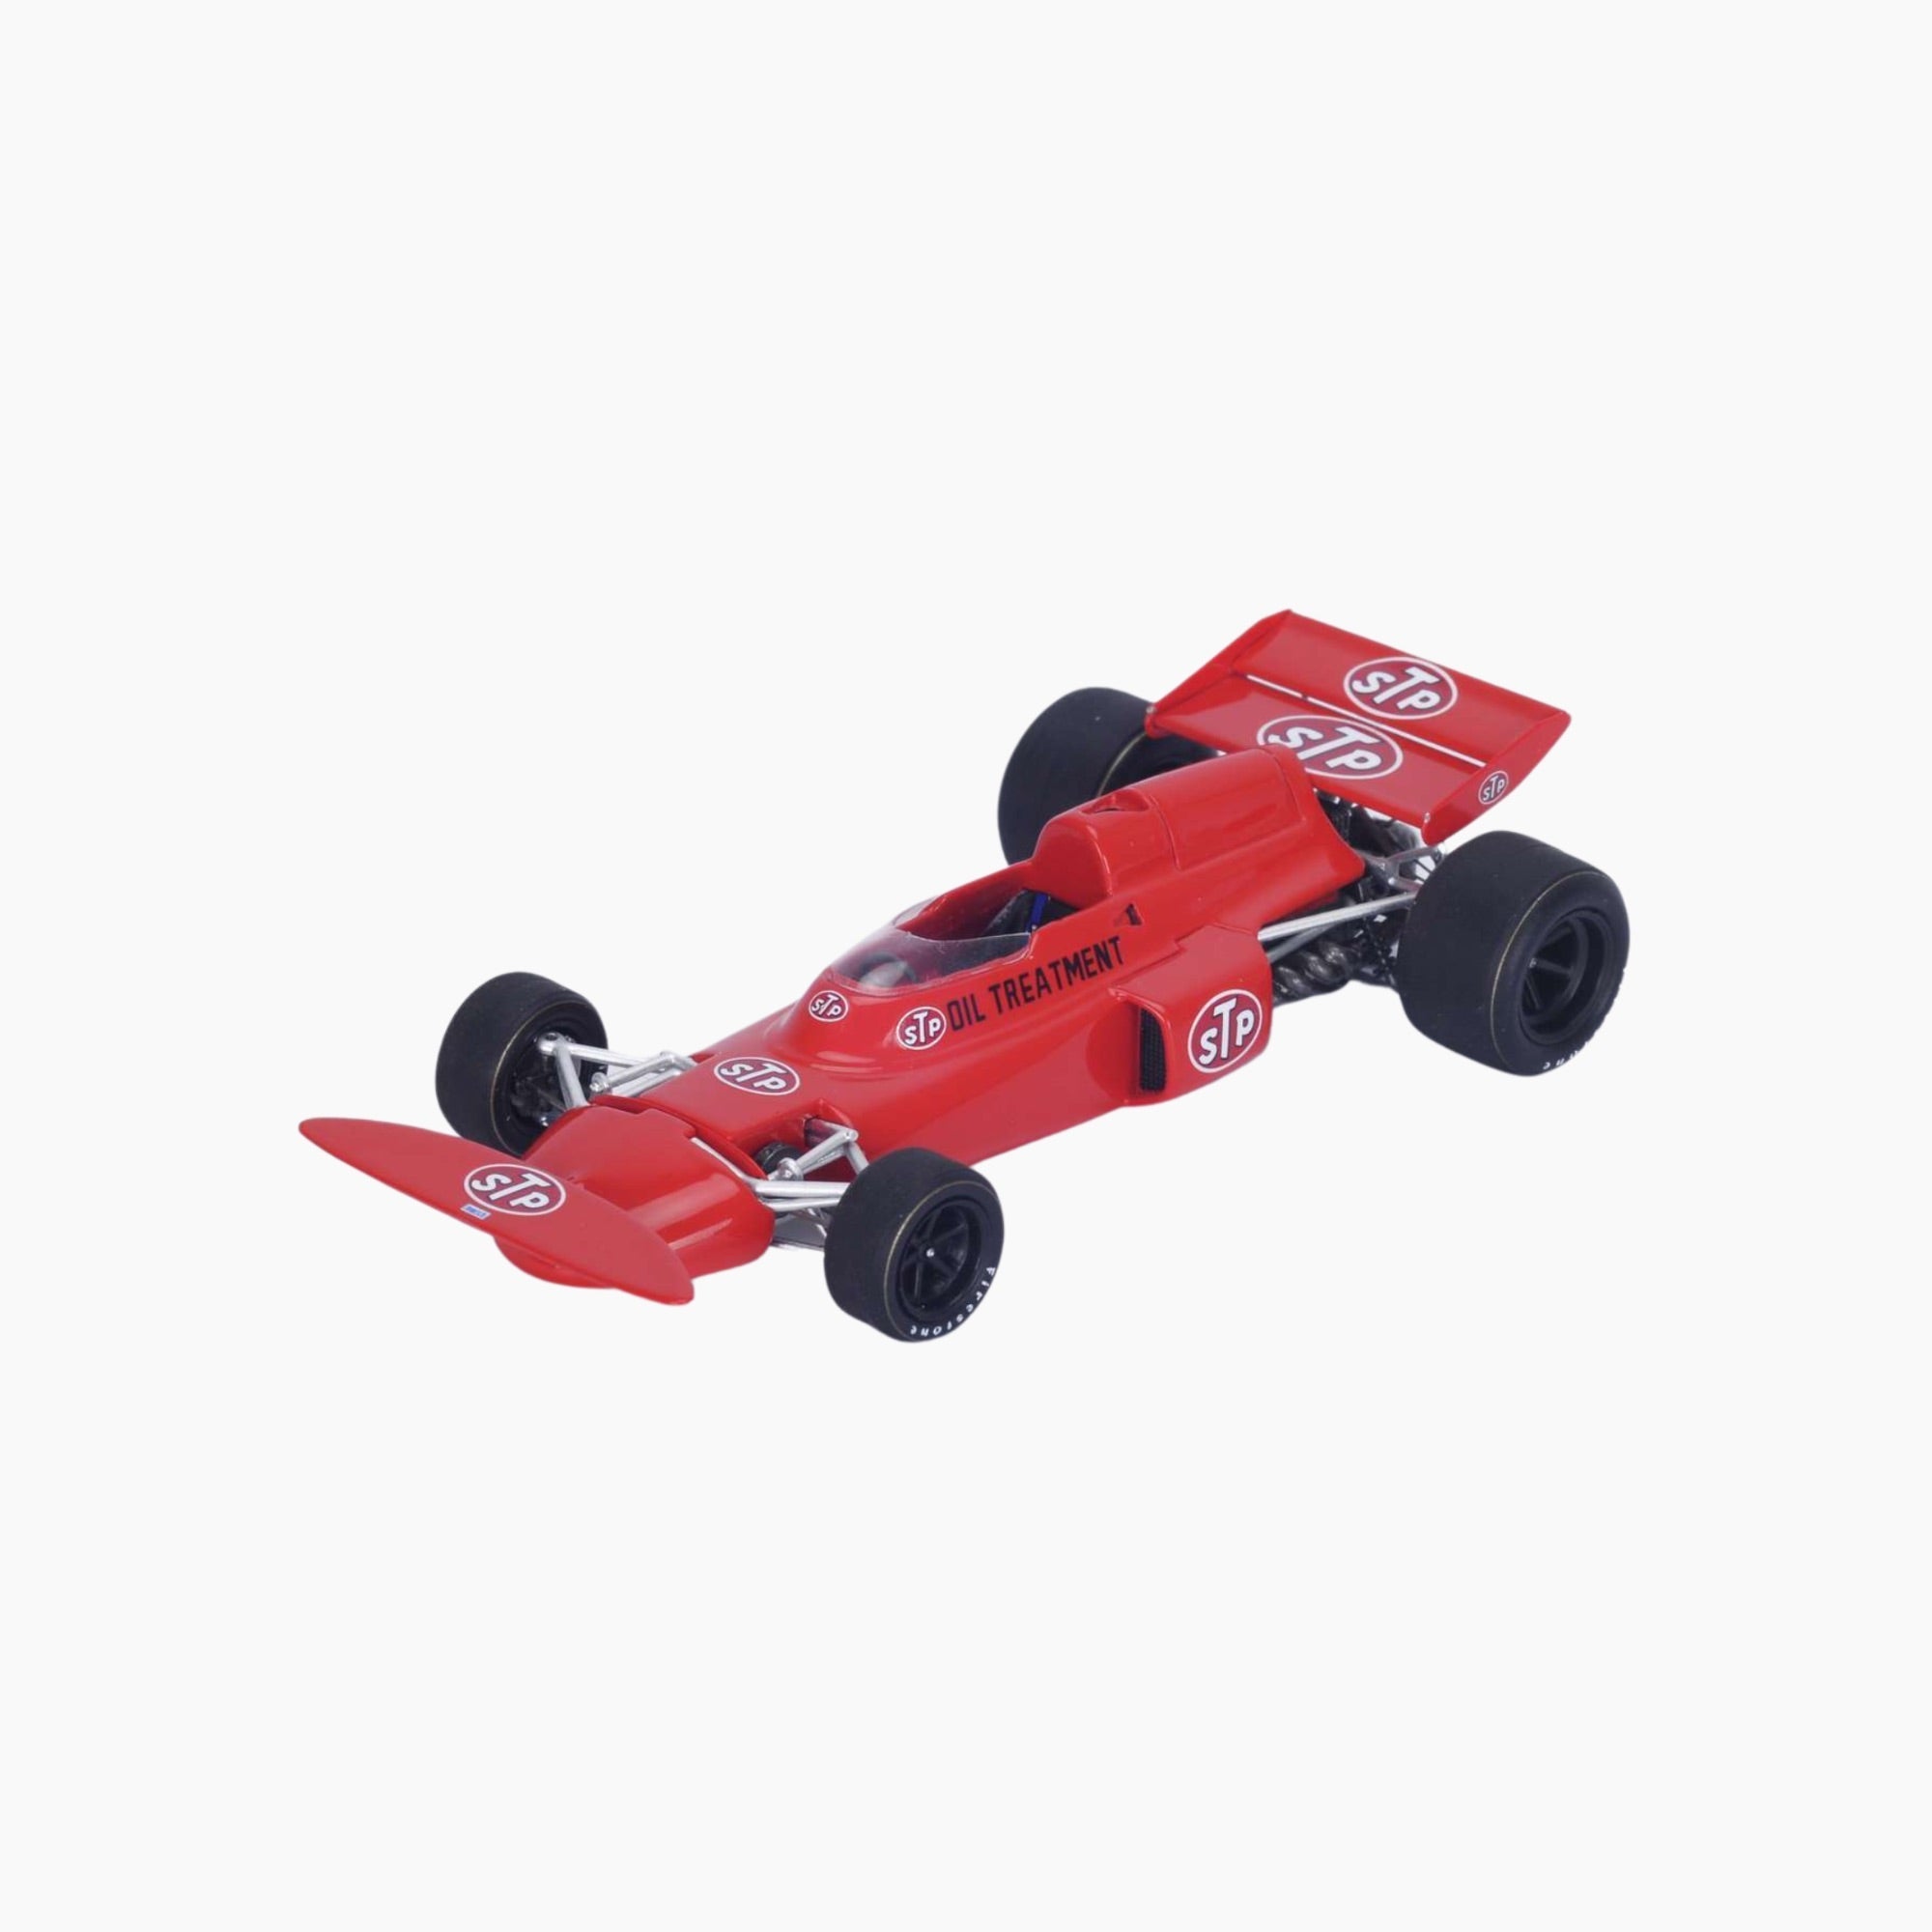 March 711 Presentation car 1971 | 1:43 Scale Model-1:43 Scale Model-Spark Models-gpx-store